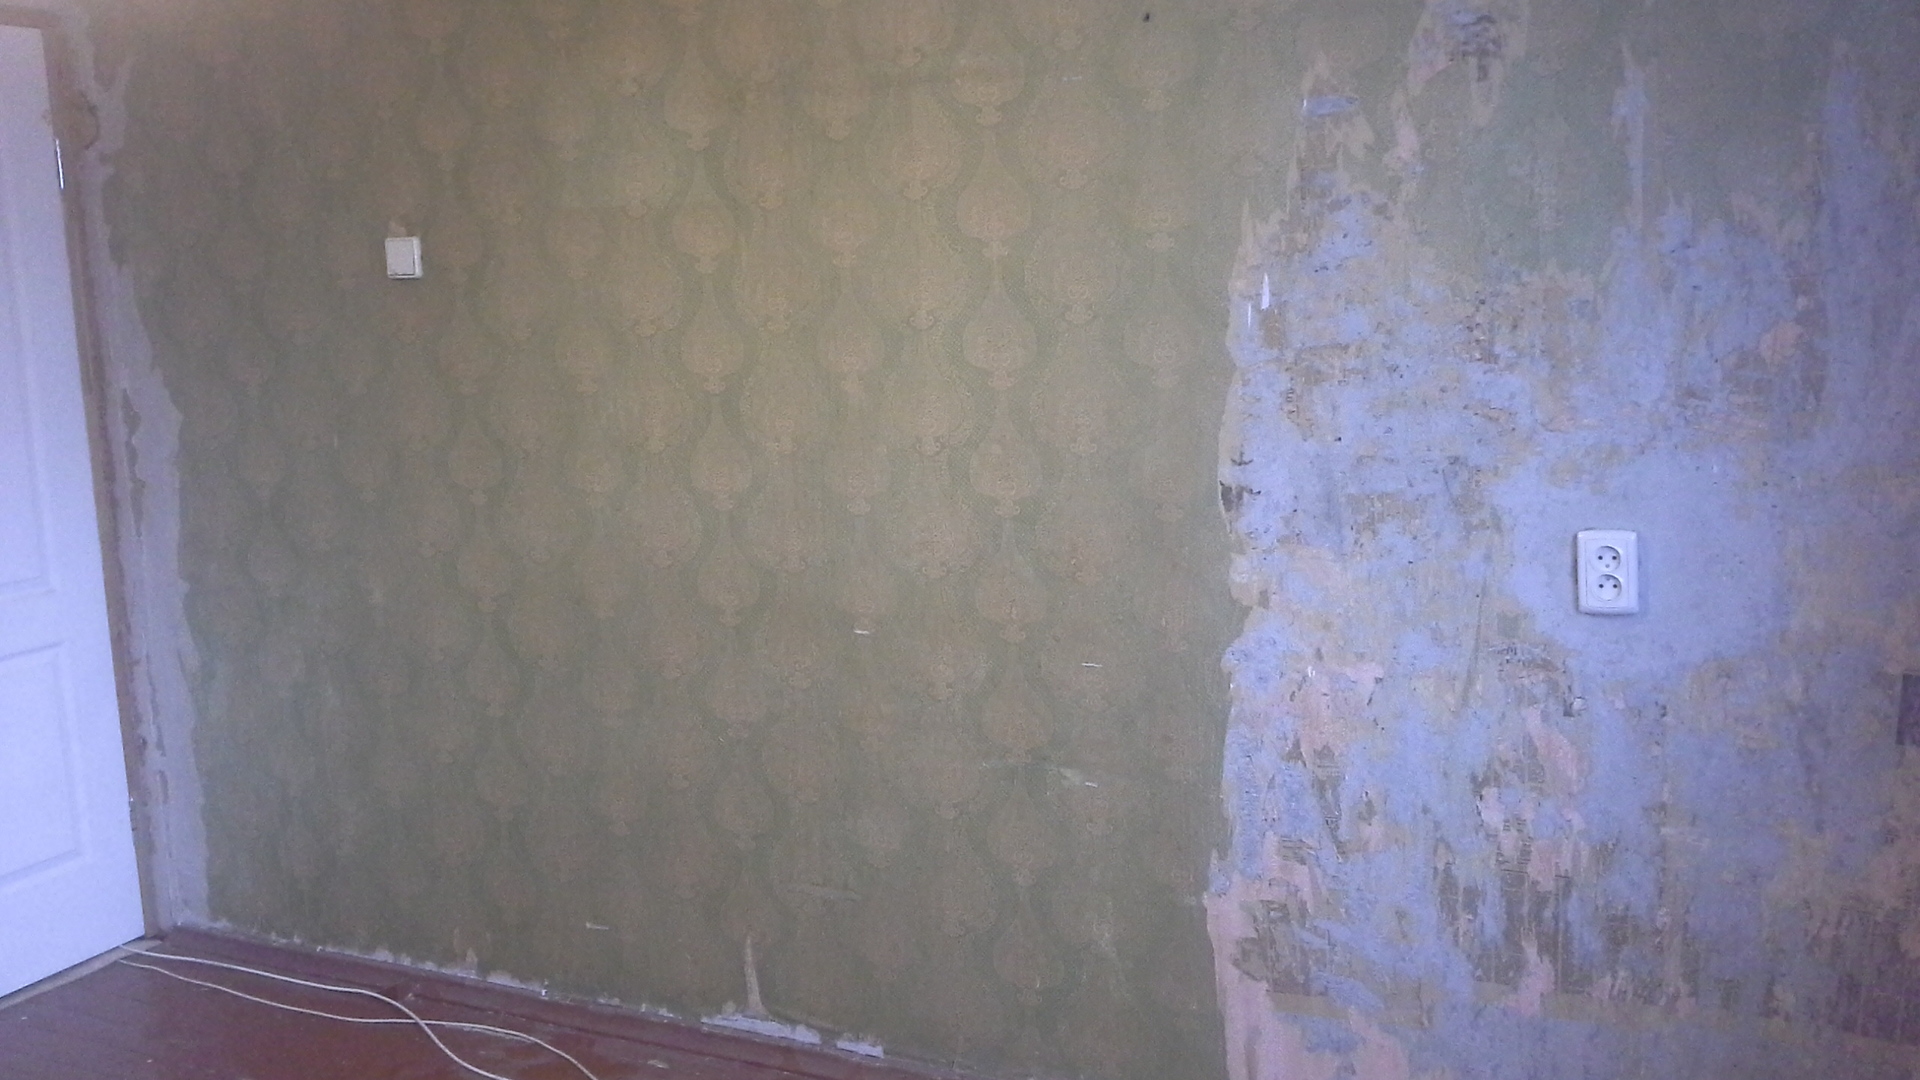 The method of priming a wall with old wallpaper for applying new material